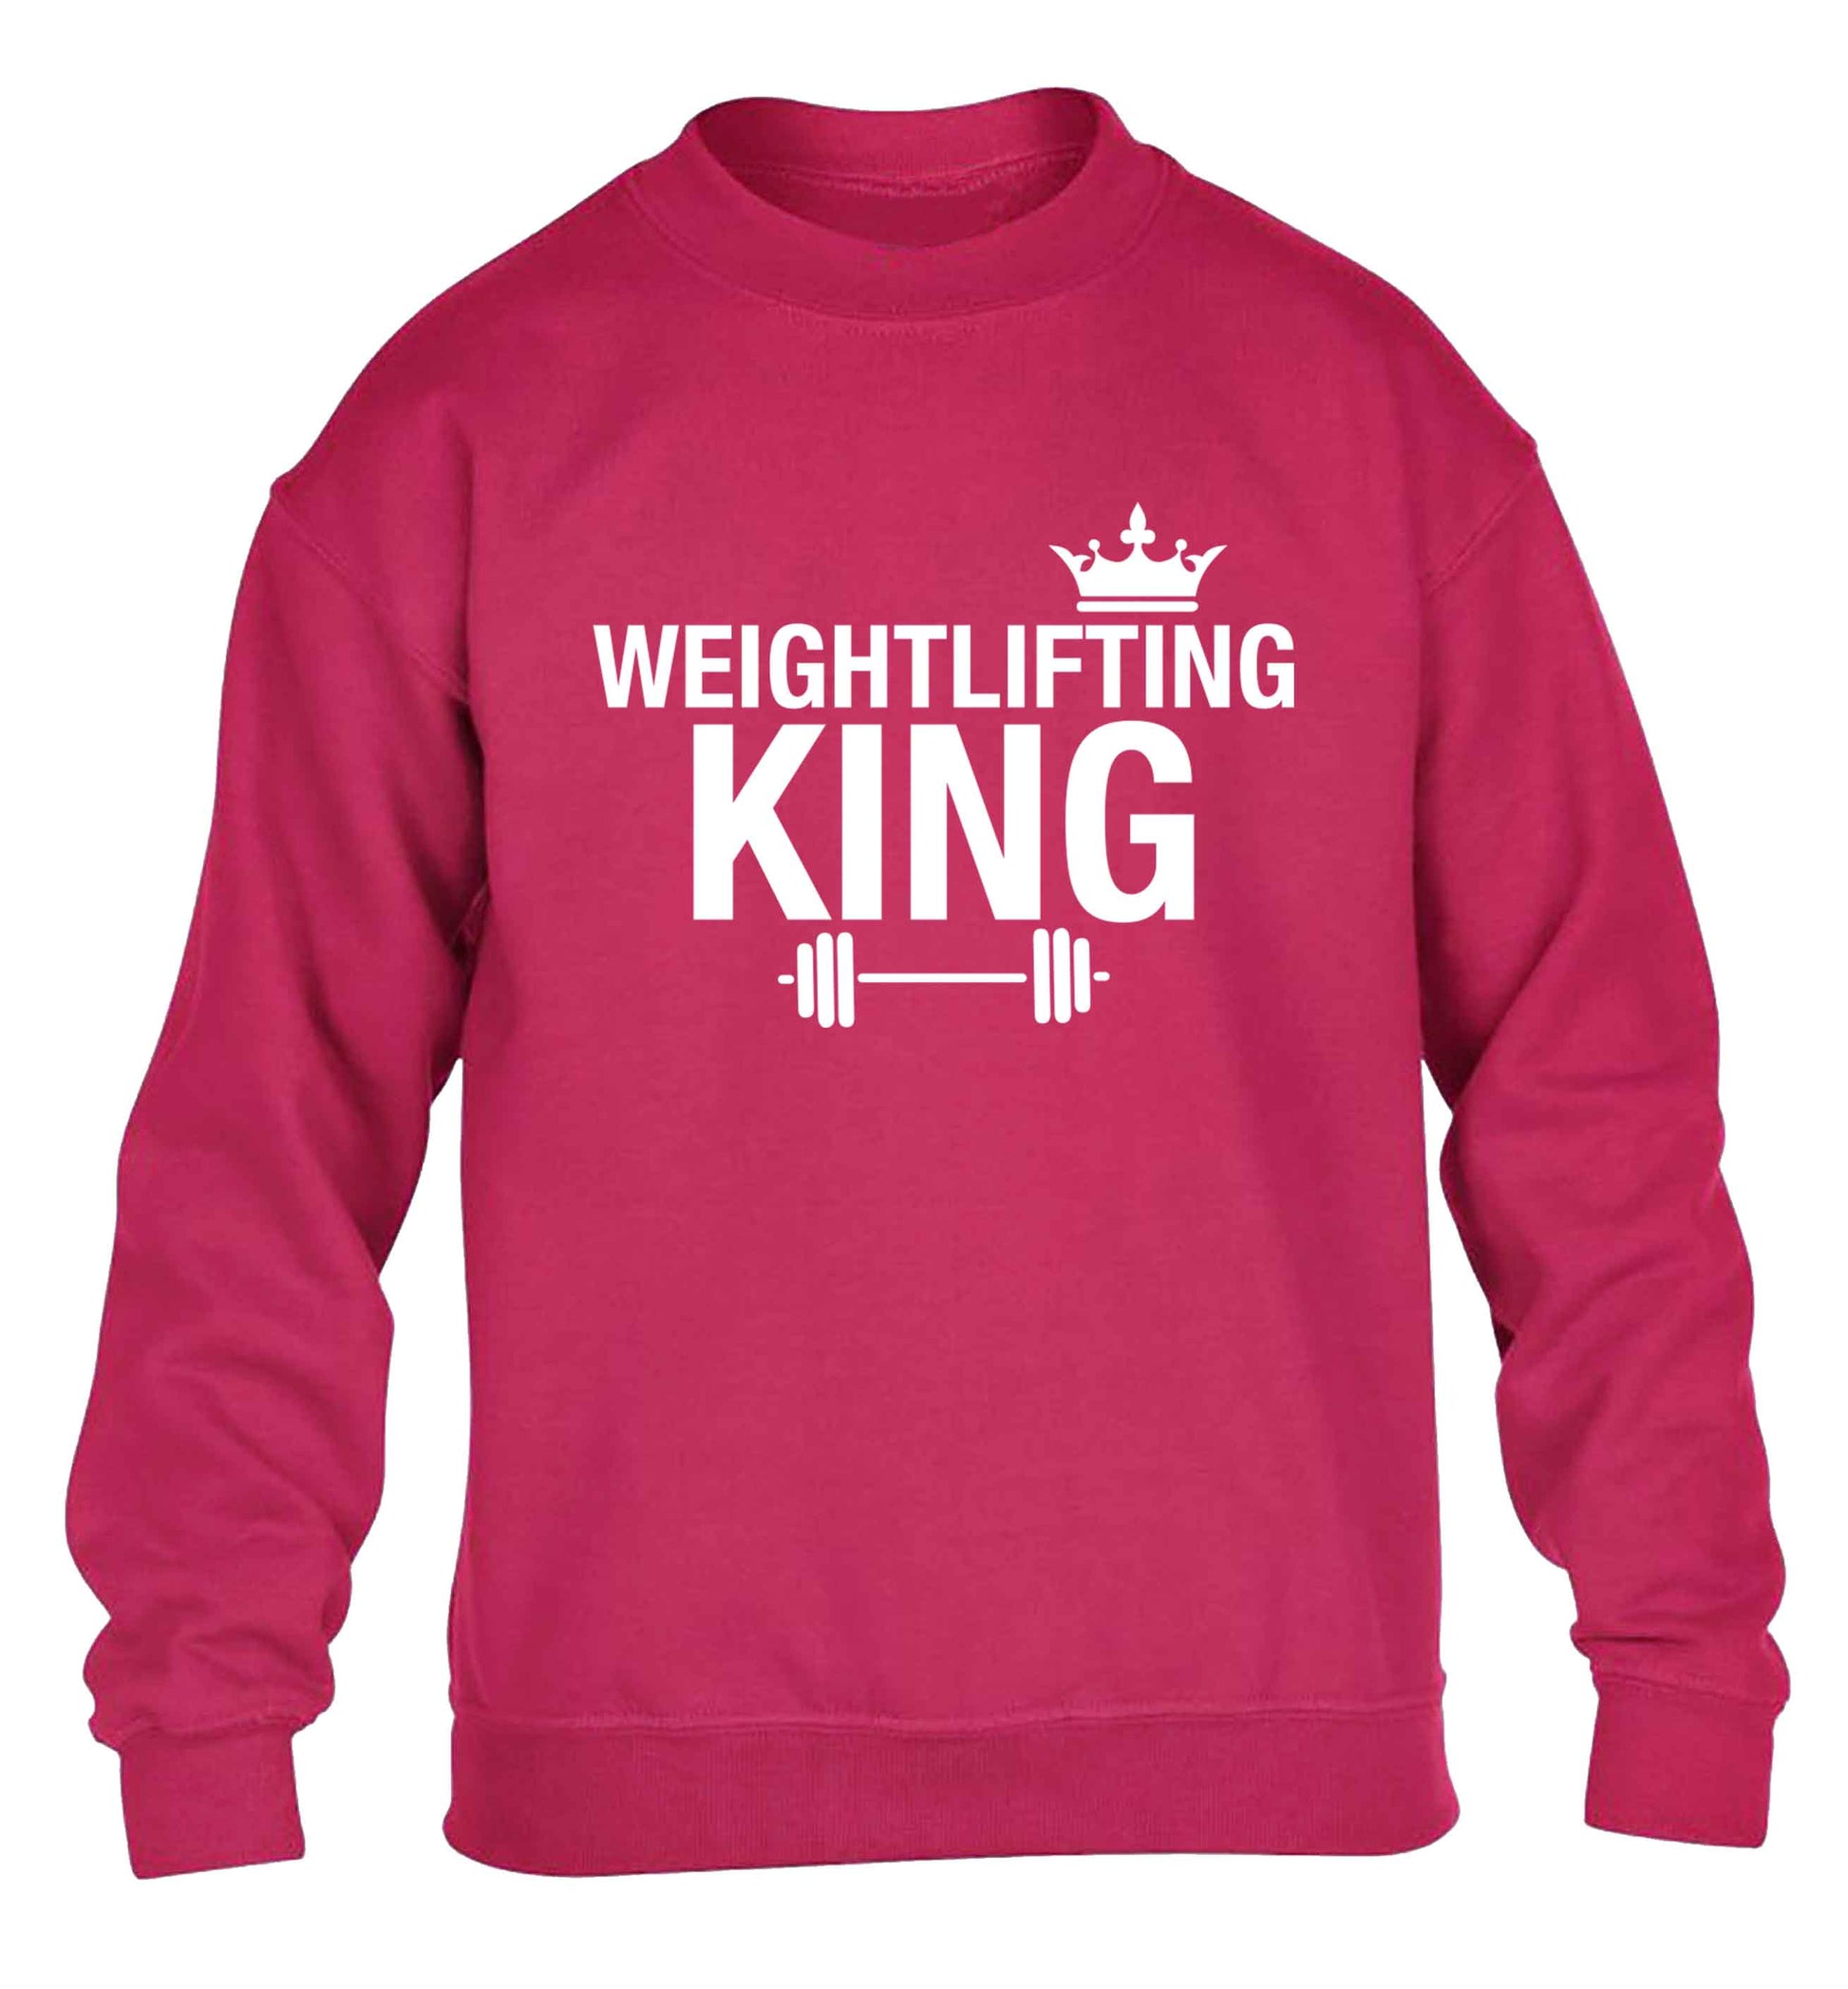 Weightlifting king children's pink sweater 12-13 Years